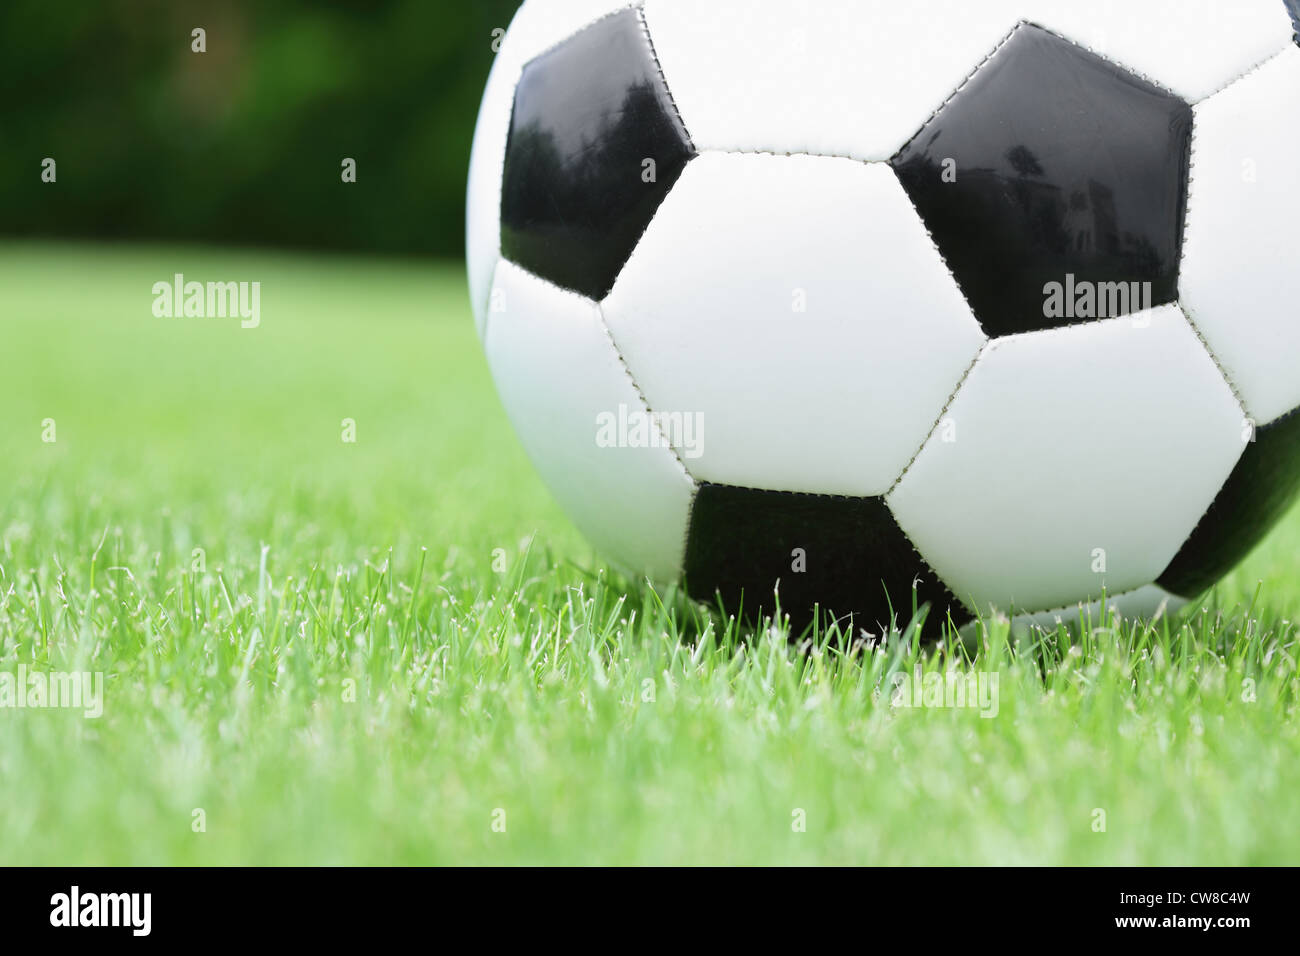 Close Up Of Soccer Ball Stock Photo